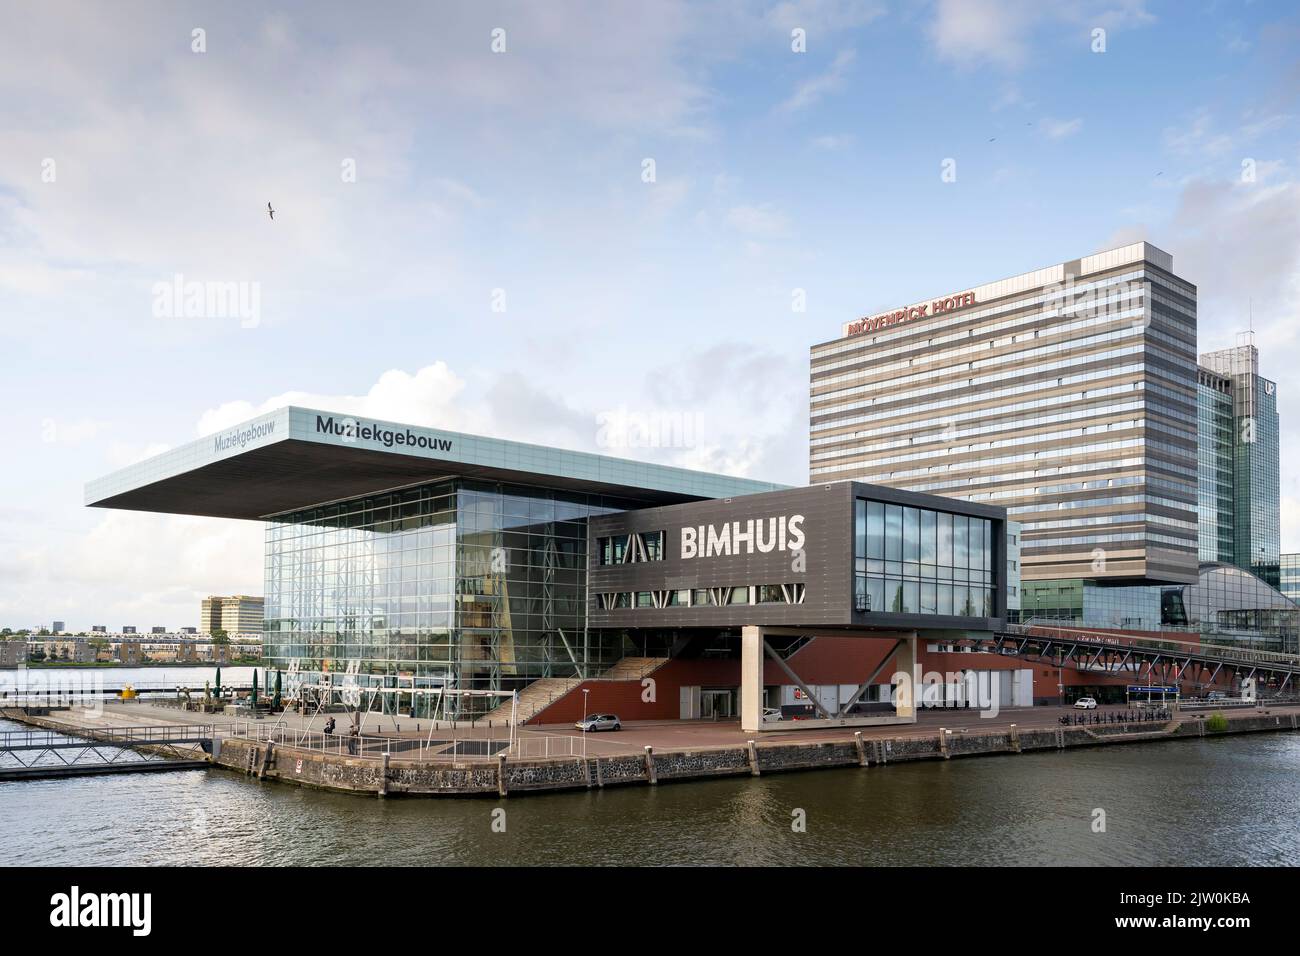 A general view of the outside of the Amsterdam passenger cruise terminal in Amsterdam, Holland. Stock Photo